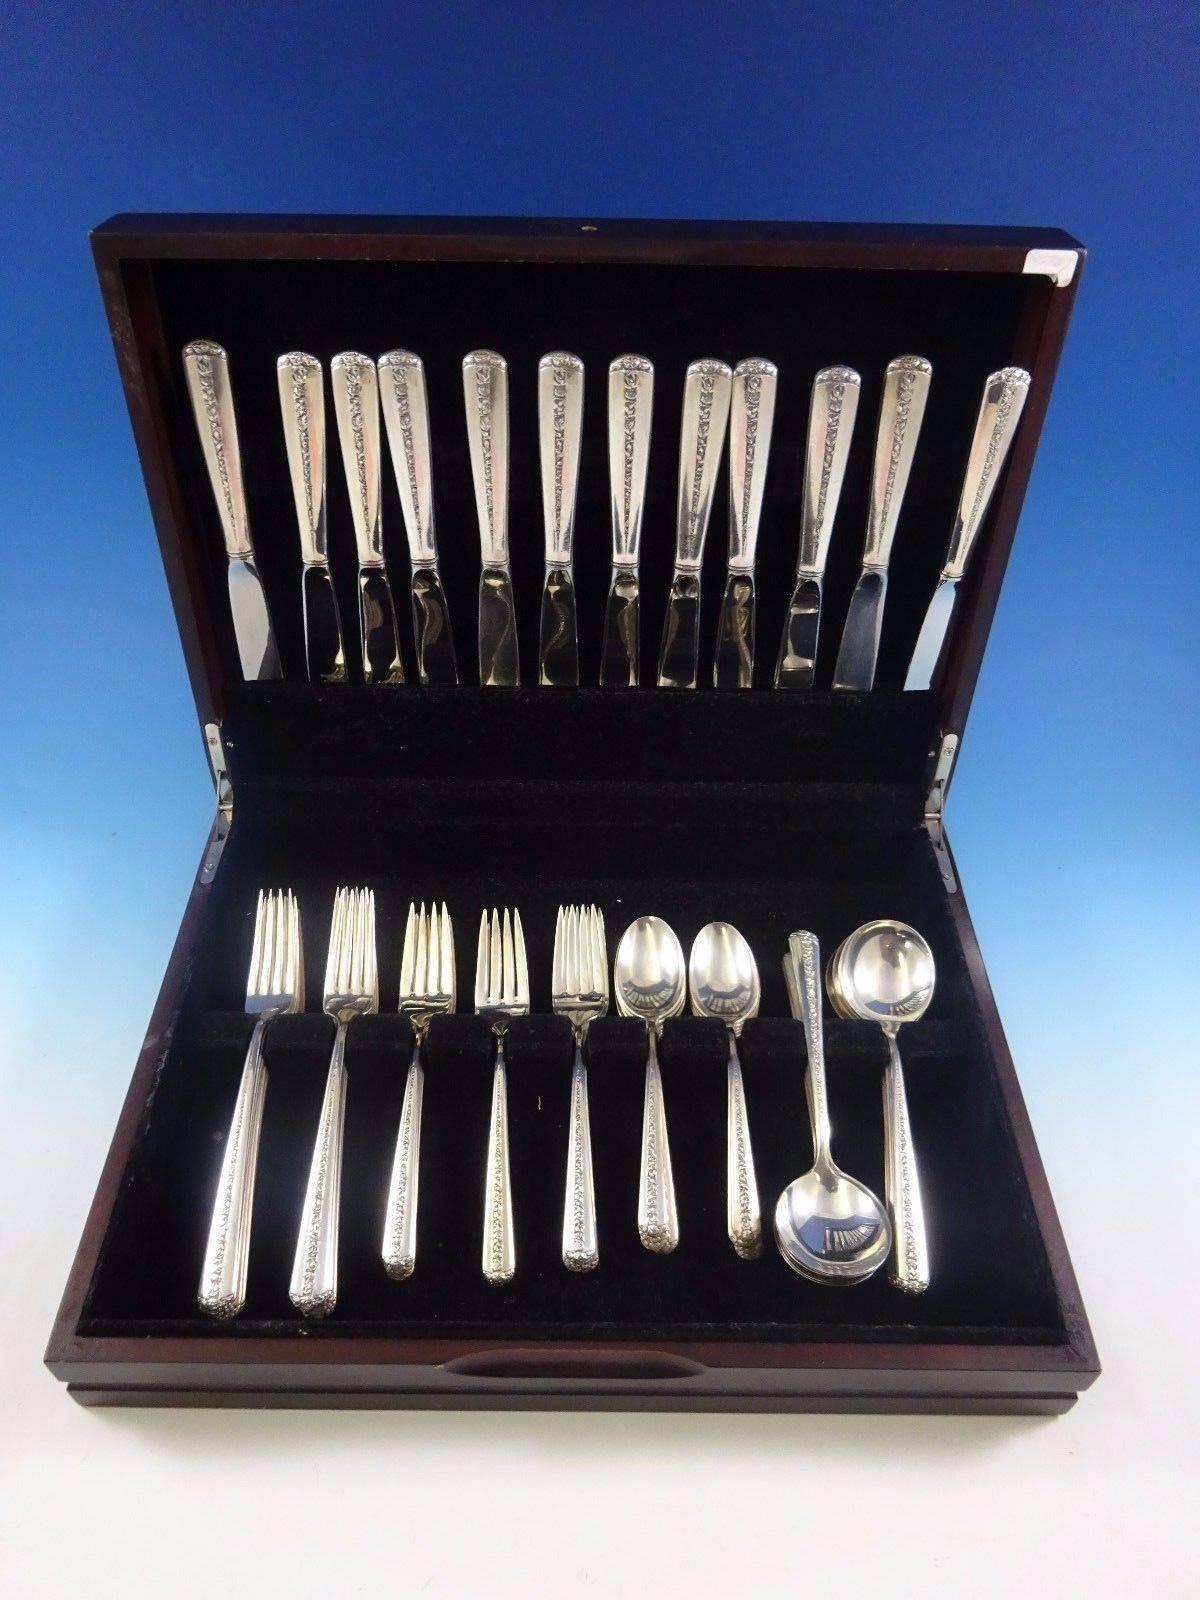 Rambler Rose by Towle Sterling Silver flatware set 60 pieces. This set includes:

12 knives, 8 5/8